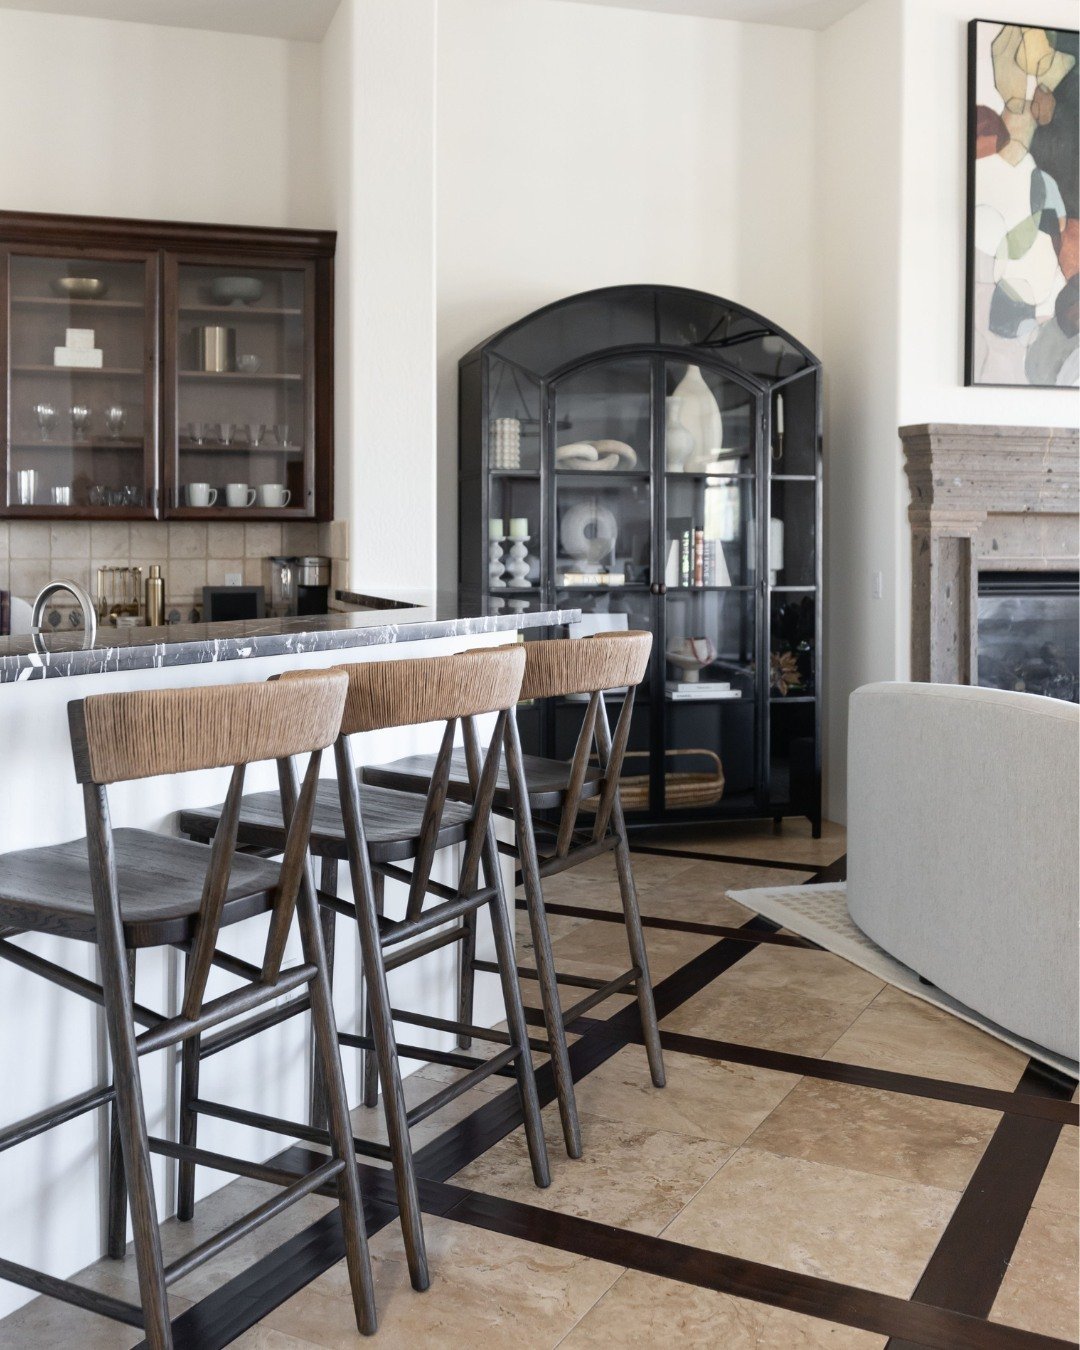 Creating the perfect counter stool setup takes more consideration than most people realize 🤔

Surrounding limitations play a huge role in finding the best bar stools for your space, like clearance under the counter, clearance behind the stool, and s